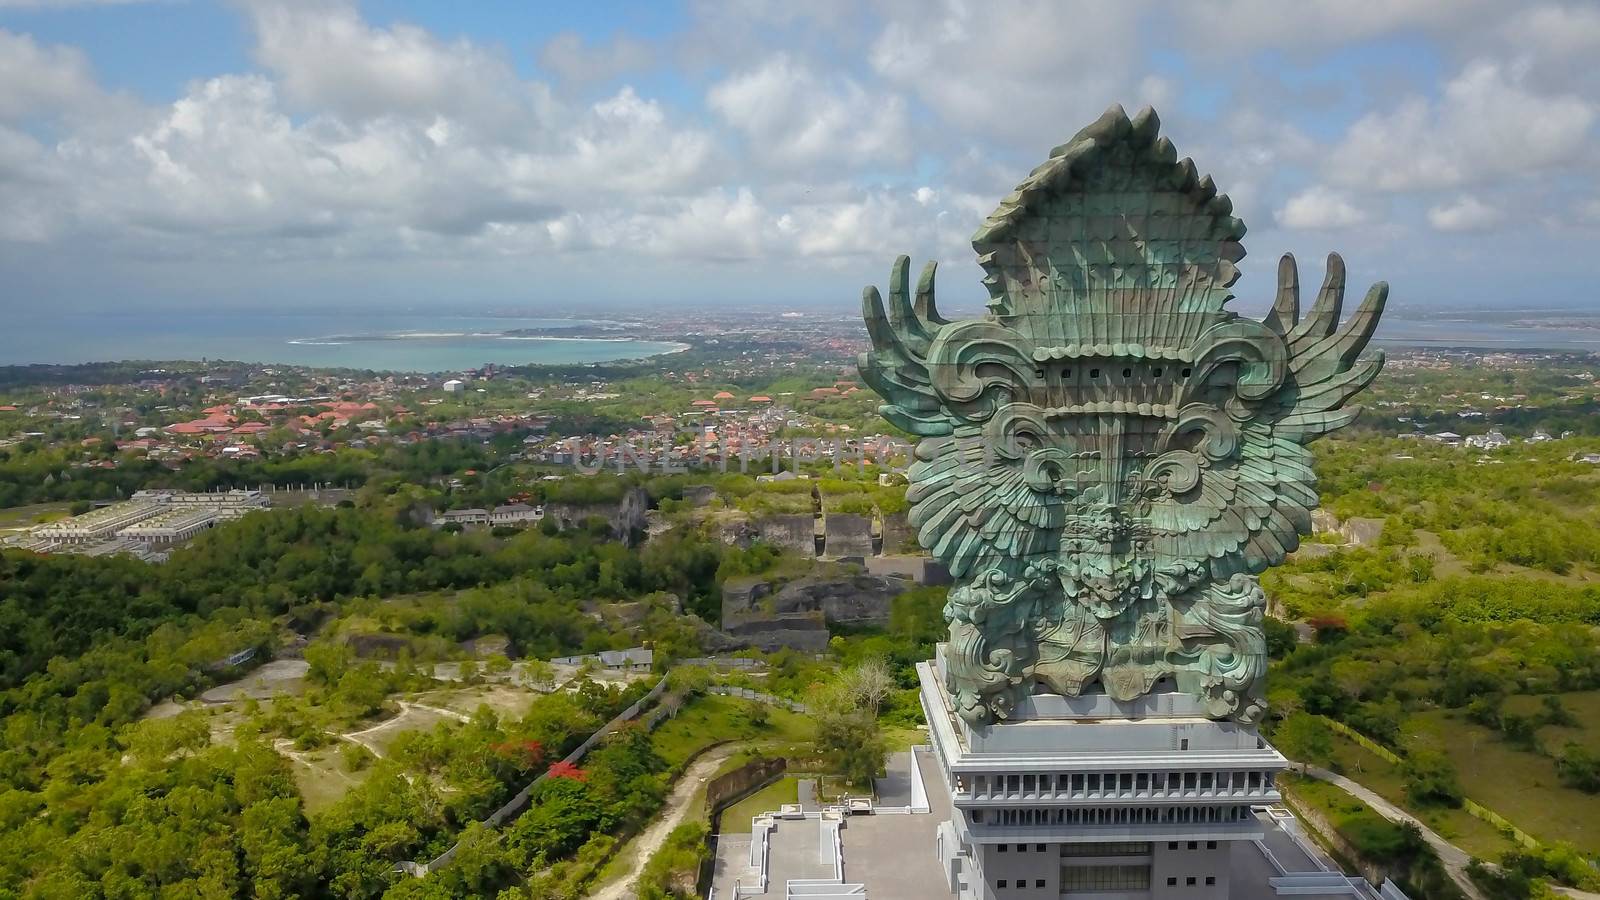 Garuda Wisnu Kencana statue at GWK Cultural Park in South Kuta one of the main attractions and the most recognizable symbols of Bali, Indonesia by Sanatana2008